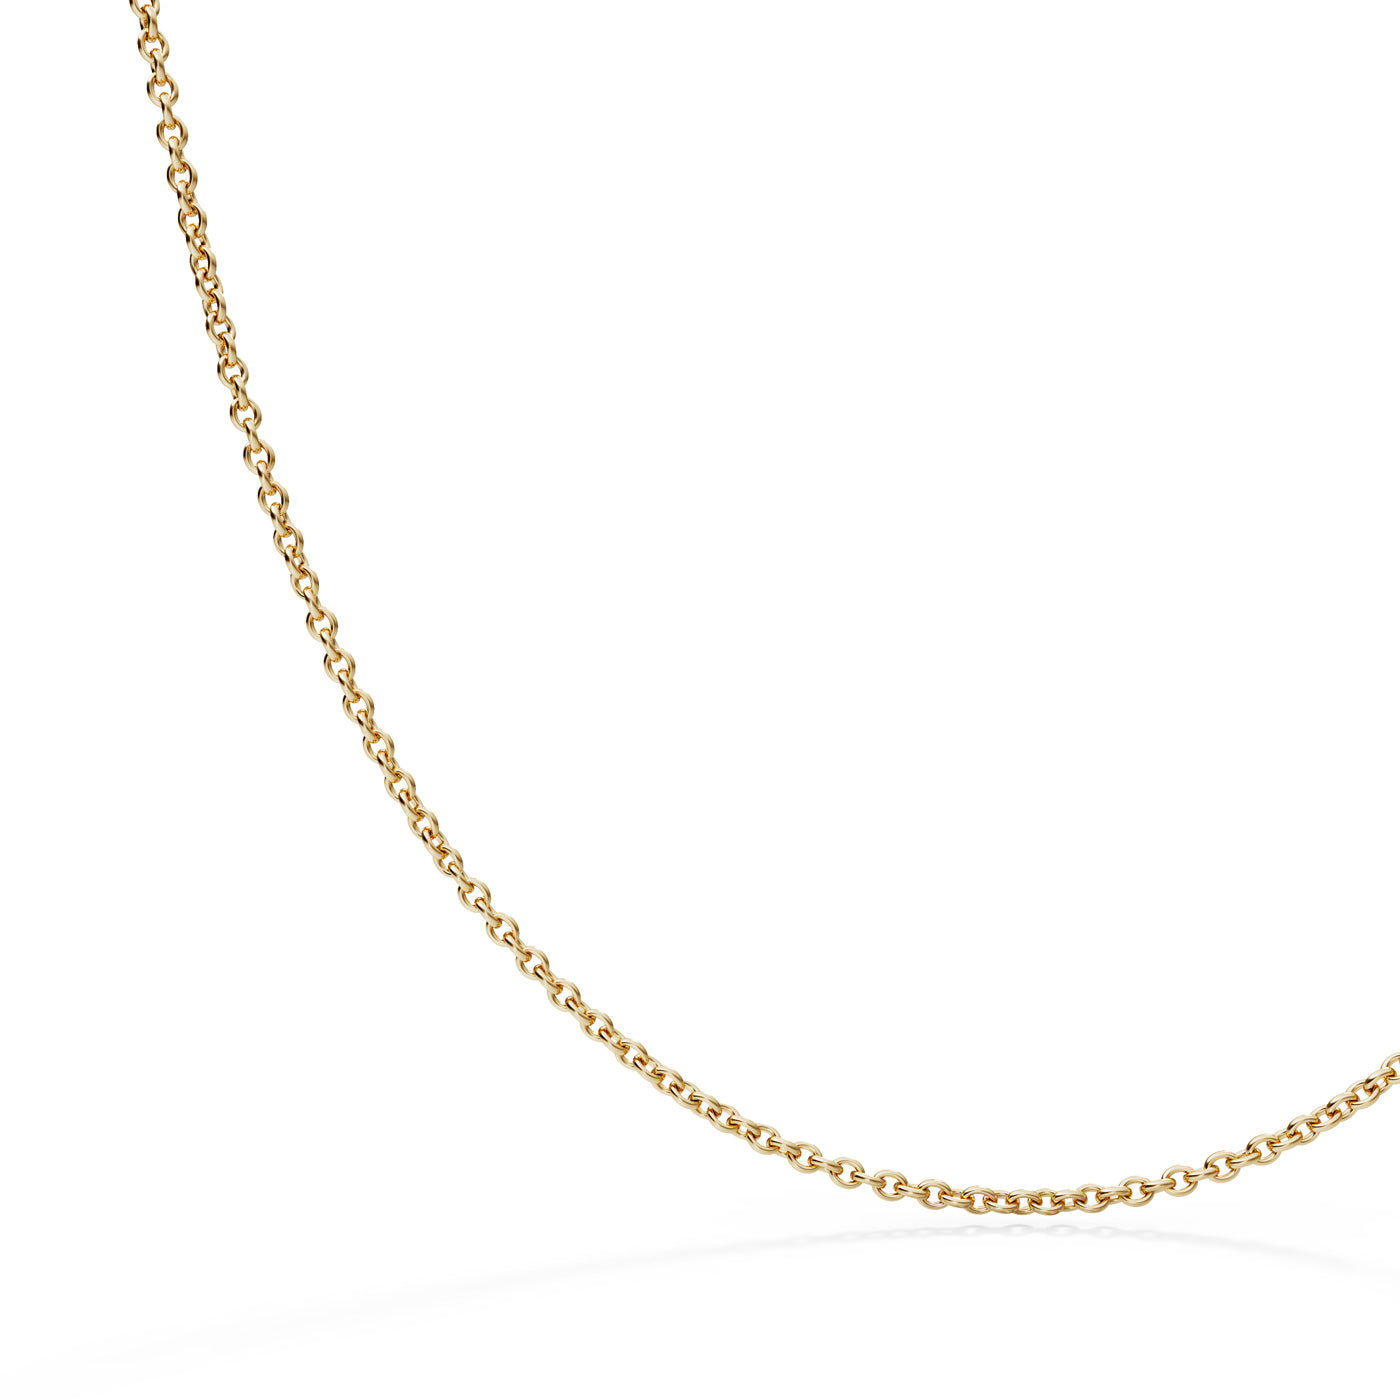 Rolo-1.2mm-Thin-18K-Yellow-Gold-Dainty-Chain-18-Inch-with-Lobster-Clasp-Closeup